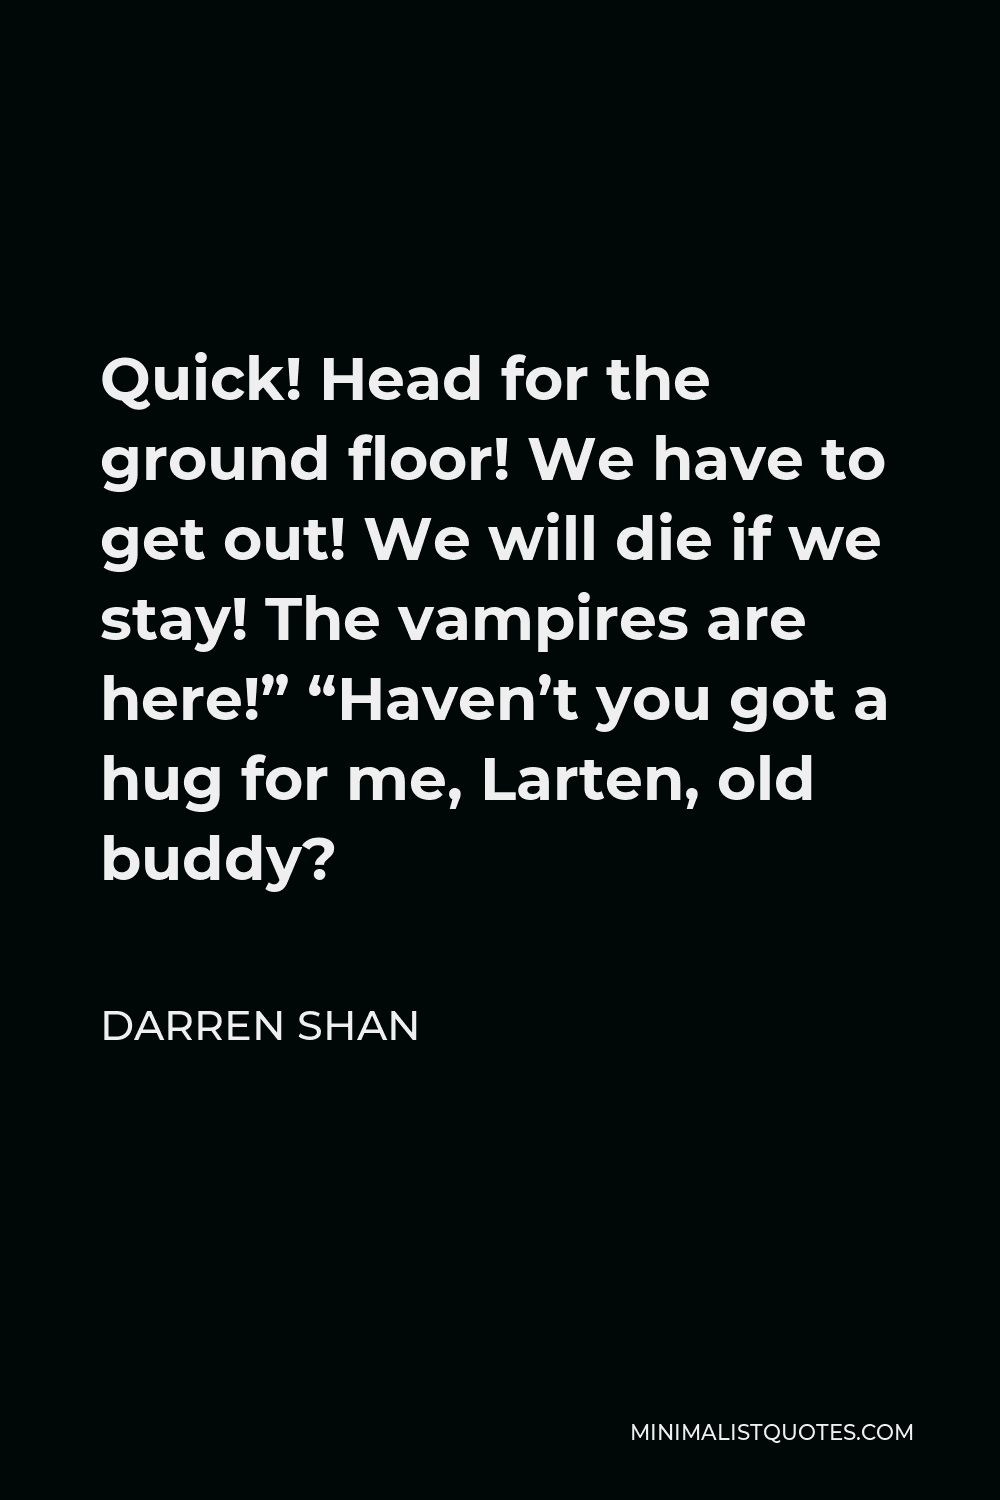 Darren Shan Quote - Quick! Head for the ground floor! We have to get out! We will die if we stay! The vampires are here!” “Haven’t you got a hug for me, Larten, old buddy?